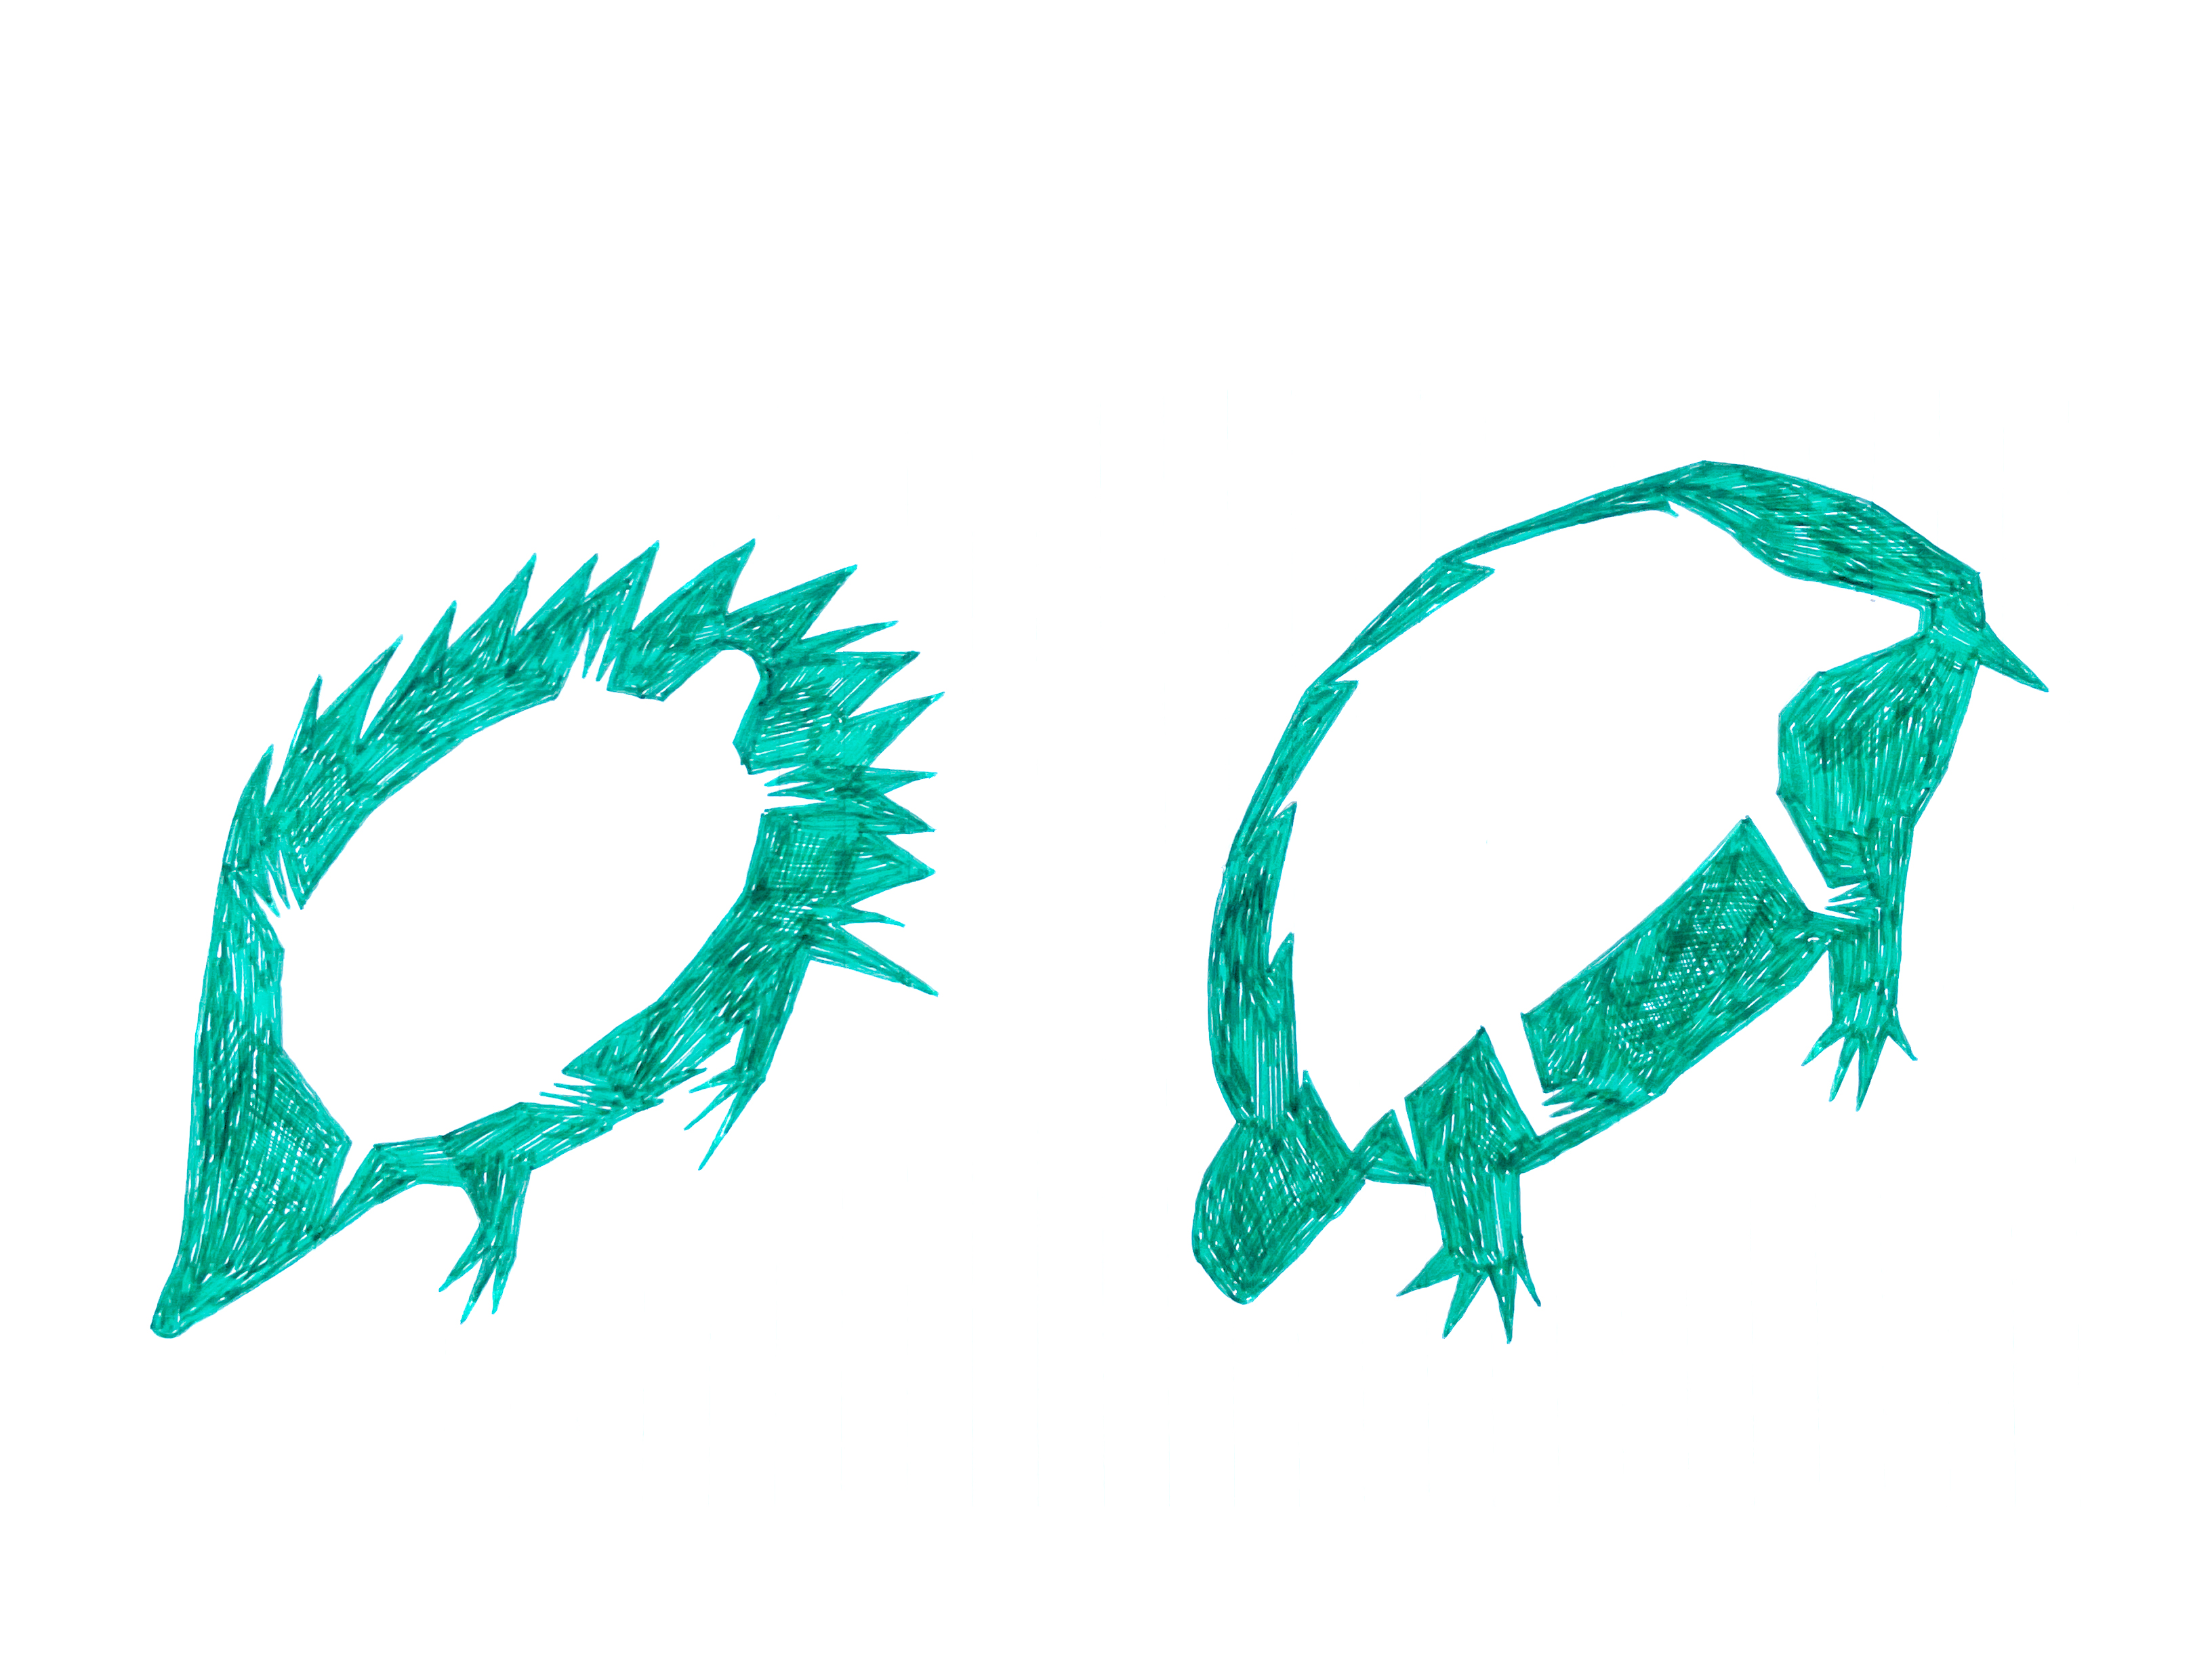 drawing in green pen of a hedgehog with a turtle silhouette in the middle, and a turtle on the right with a hedgehog silhouette